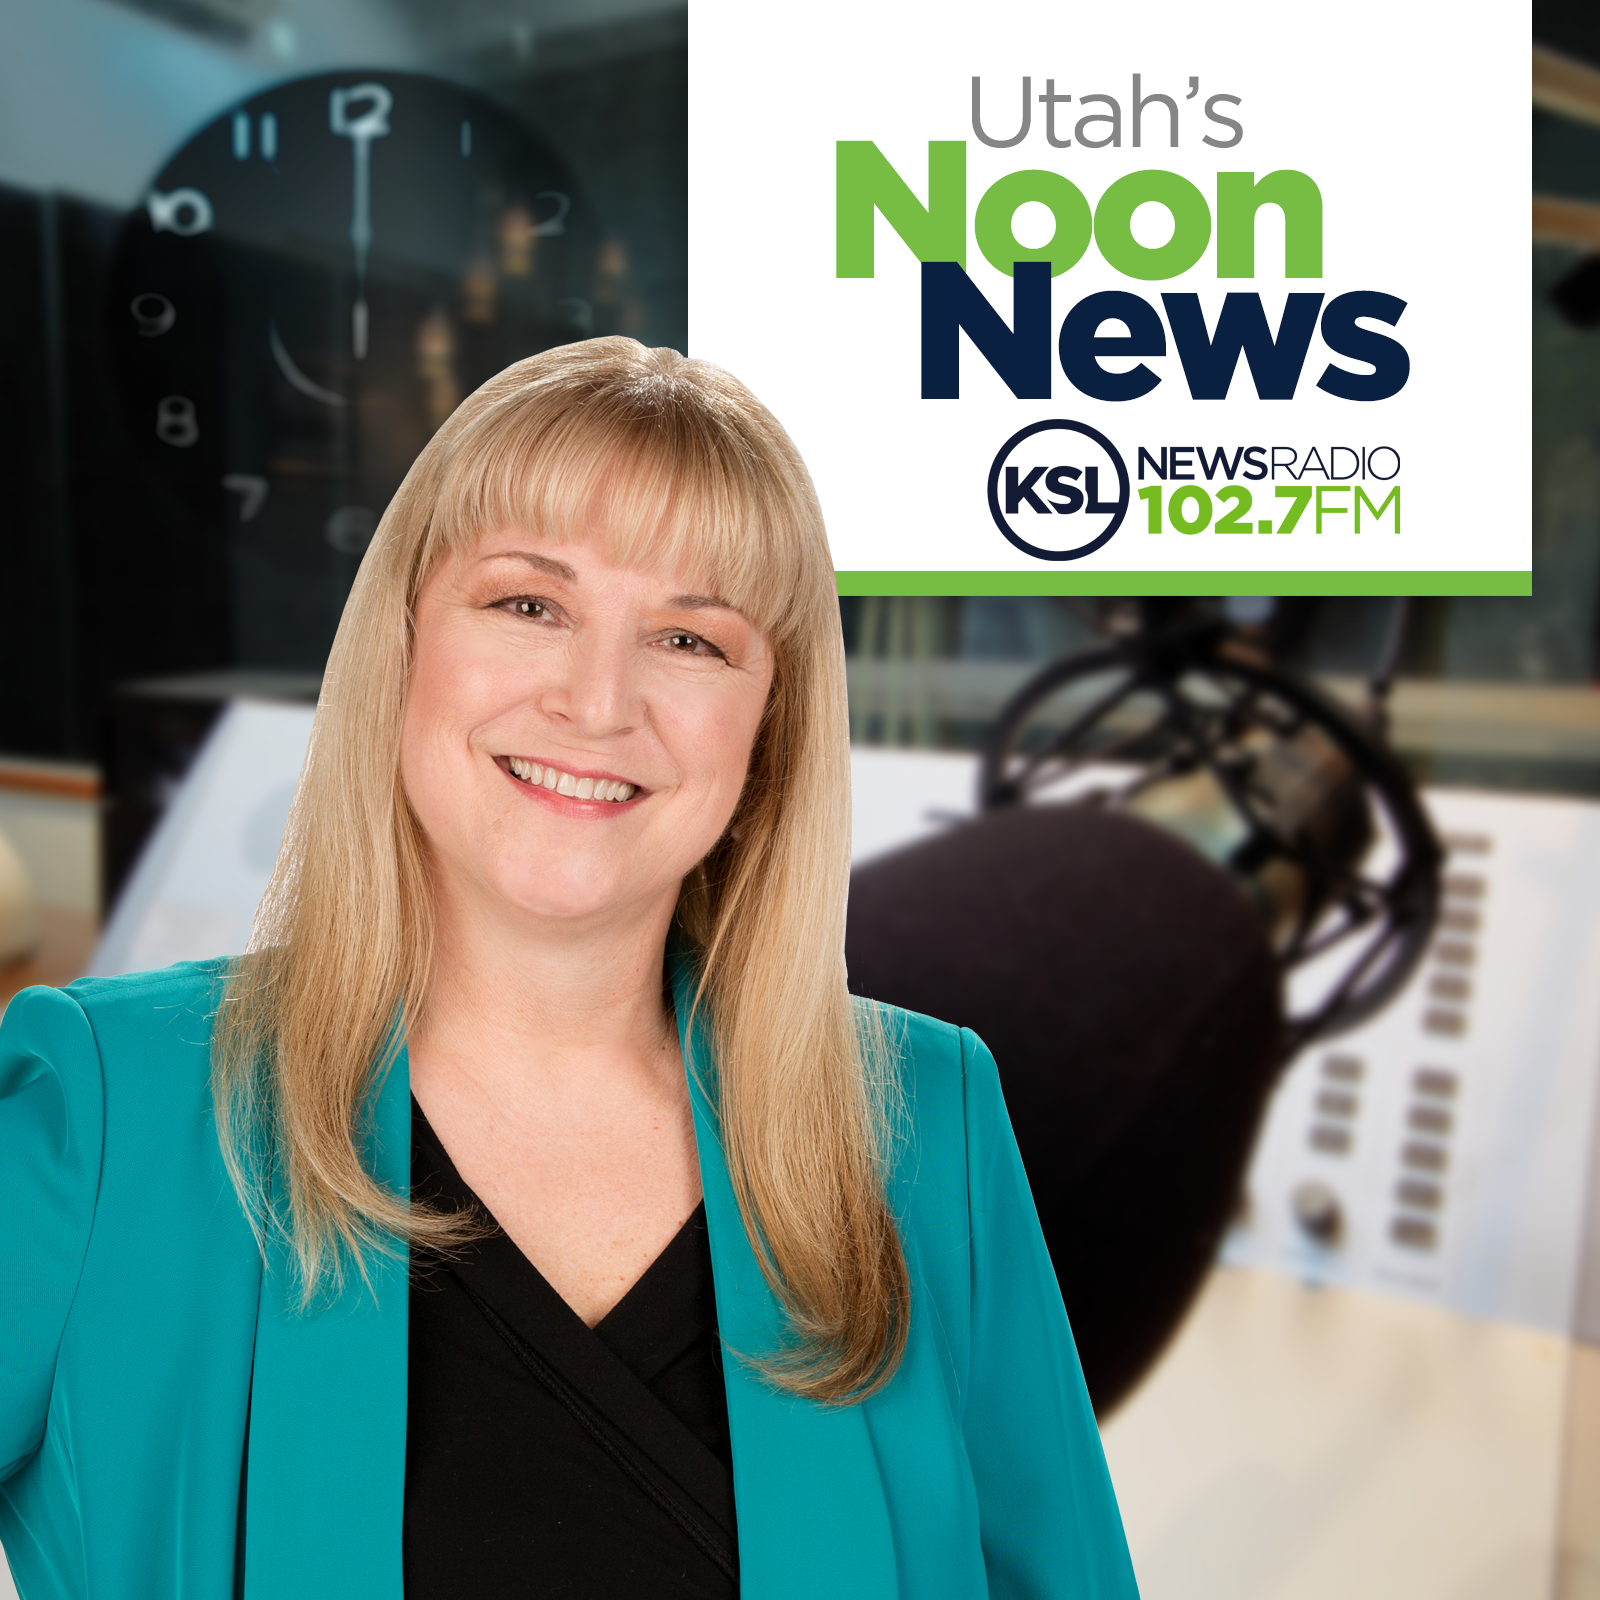 Utah Governor outlines Thanksgiving guidlines during COVID - Nov. 19, 2020